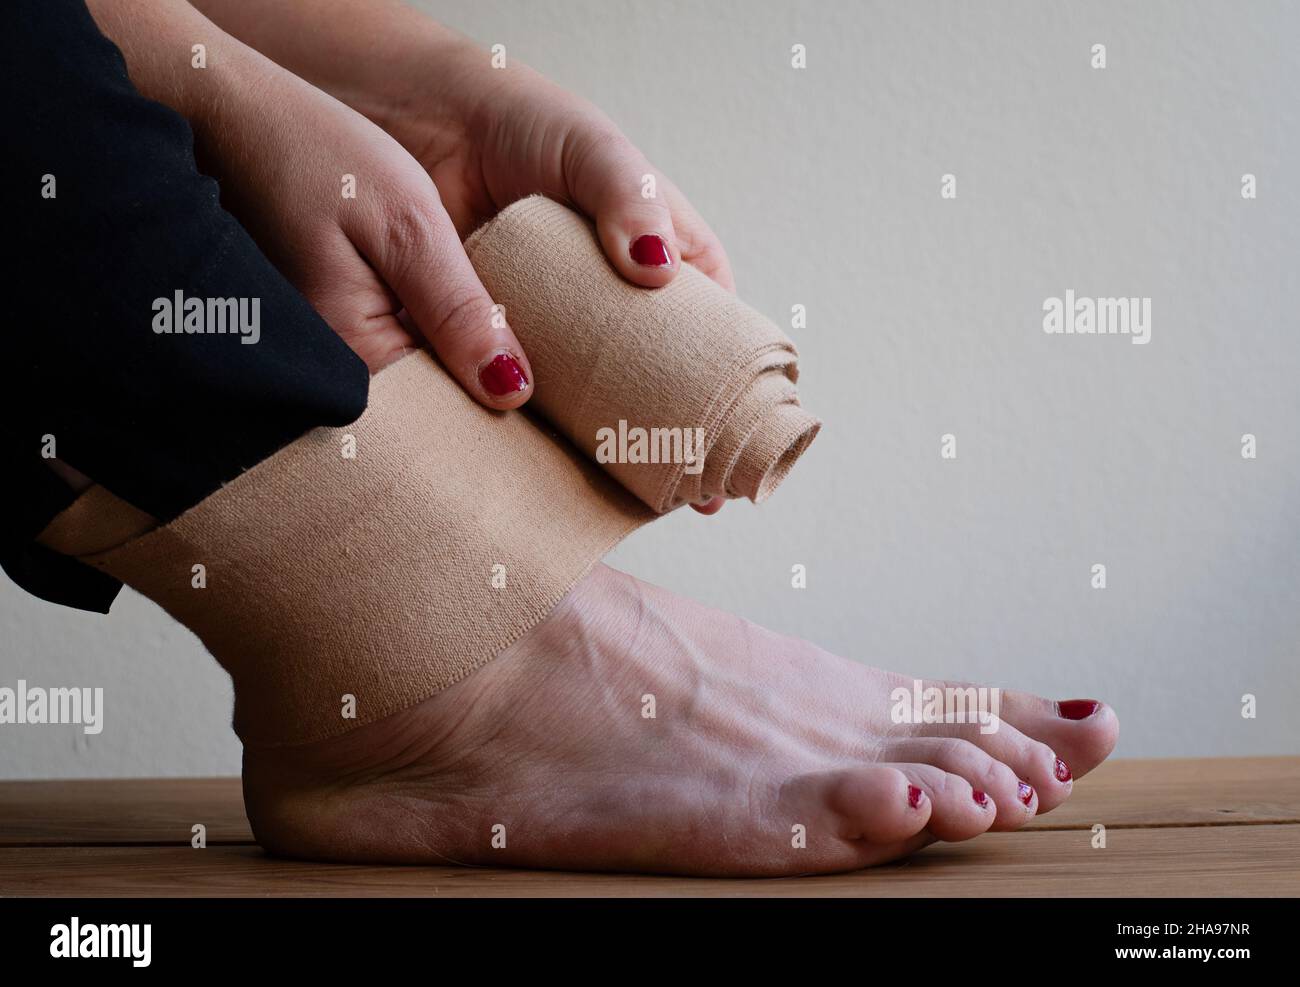 Page 3 - Ankle Sprain High Resolution Stock Photography and Images - Alamy